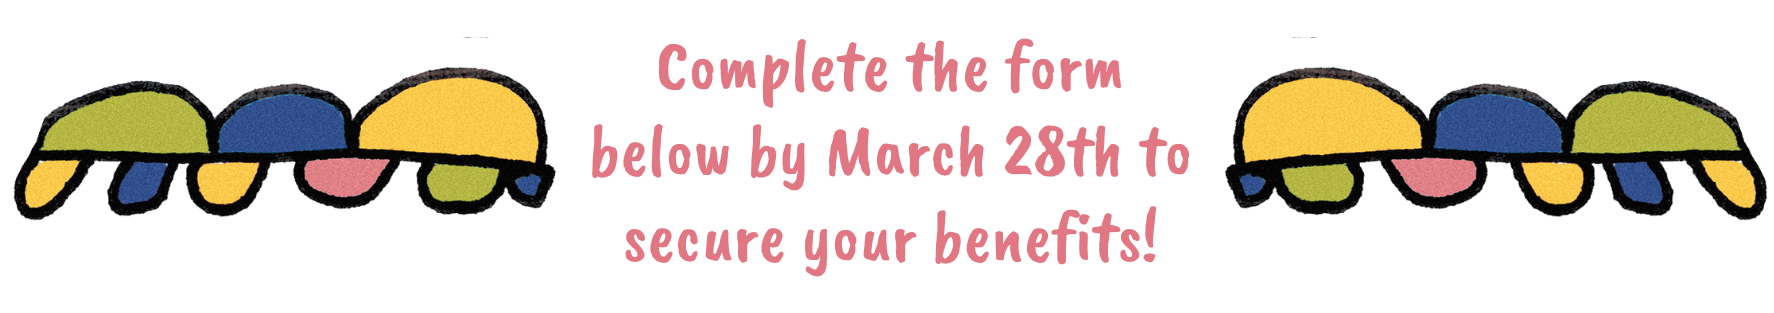 Complete the form below by March 28th to secure your benefits!